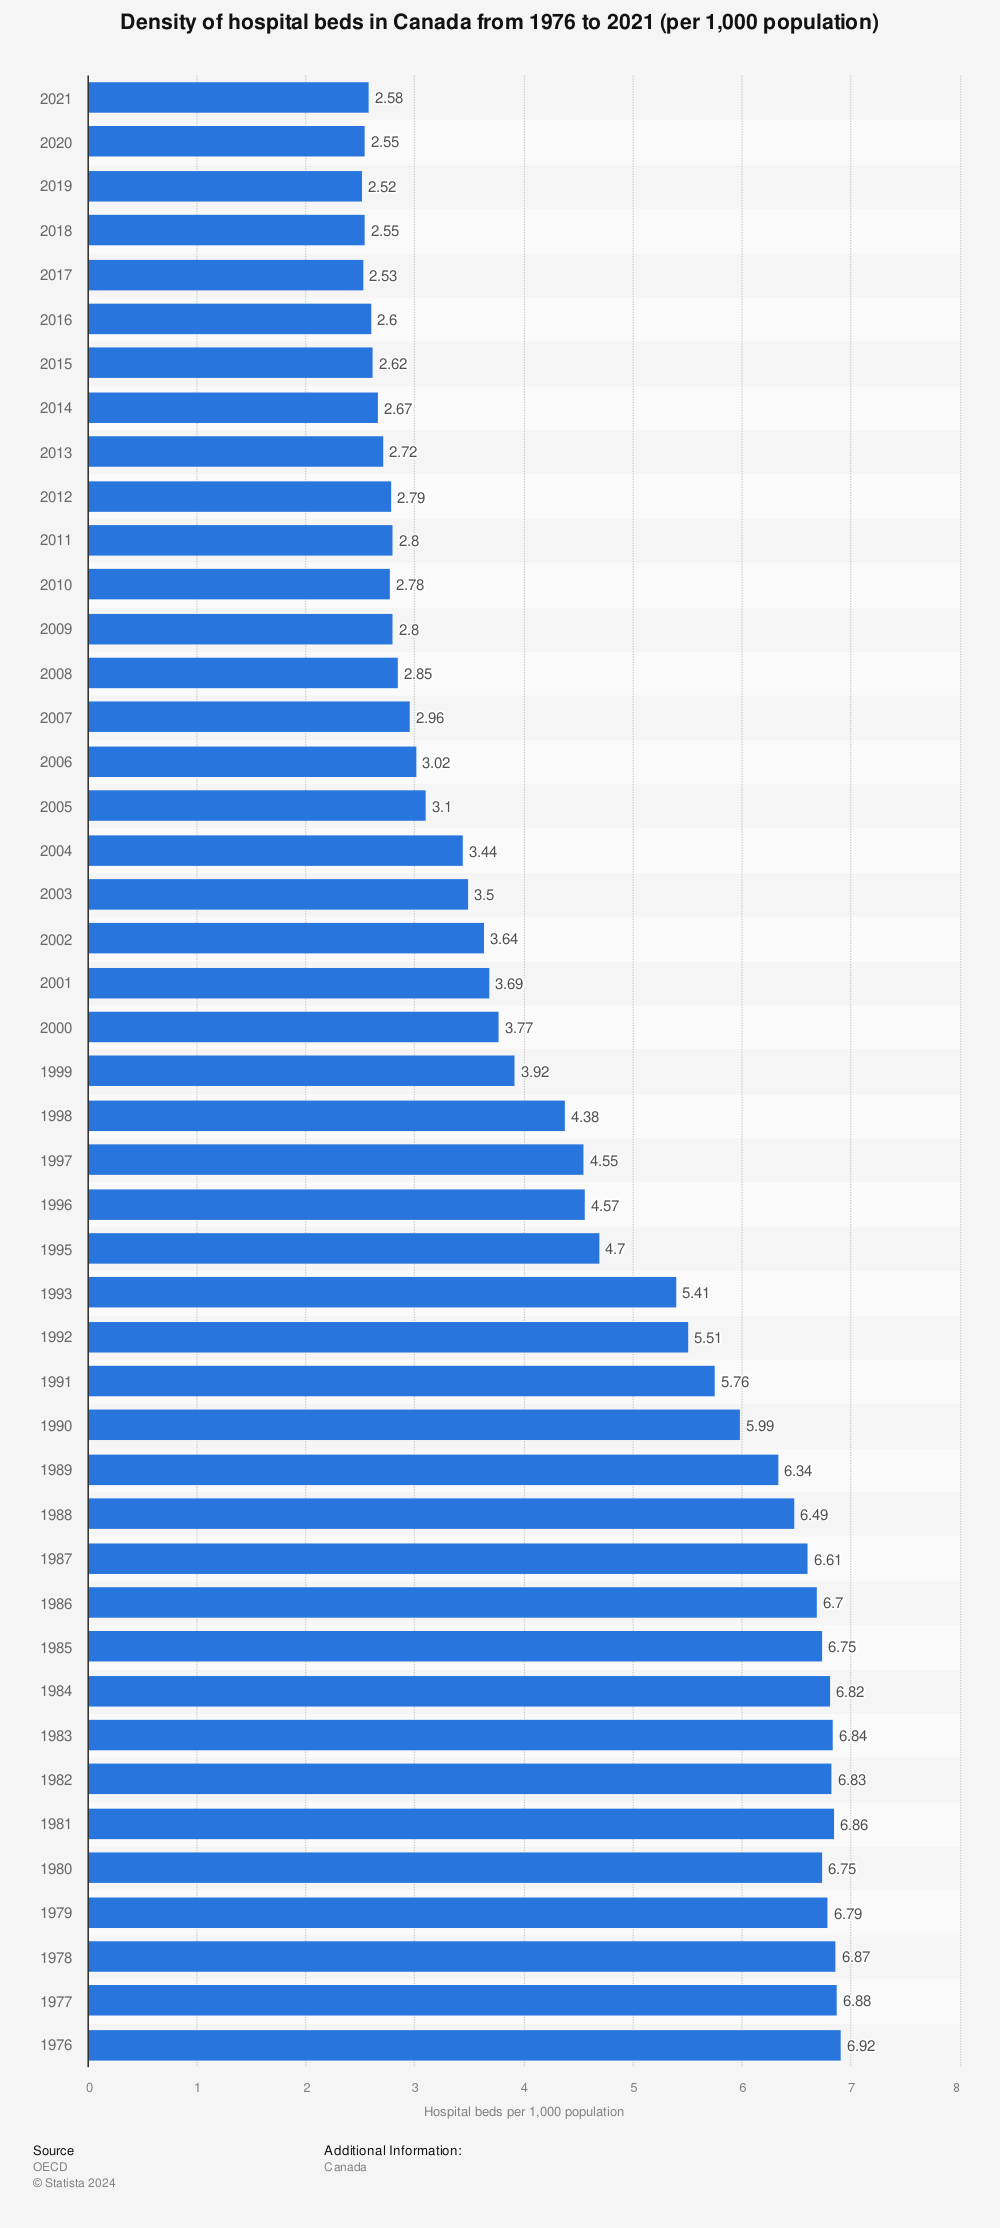 Statistic: Density of hospital beds in Canada from 1976 to 2019 (per 1,000 population) | Statista